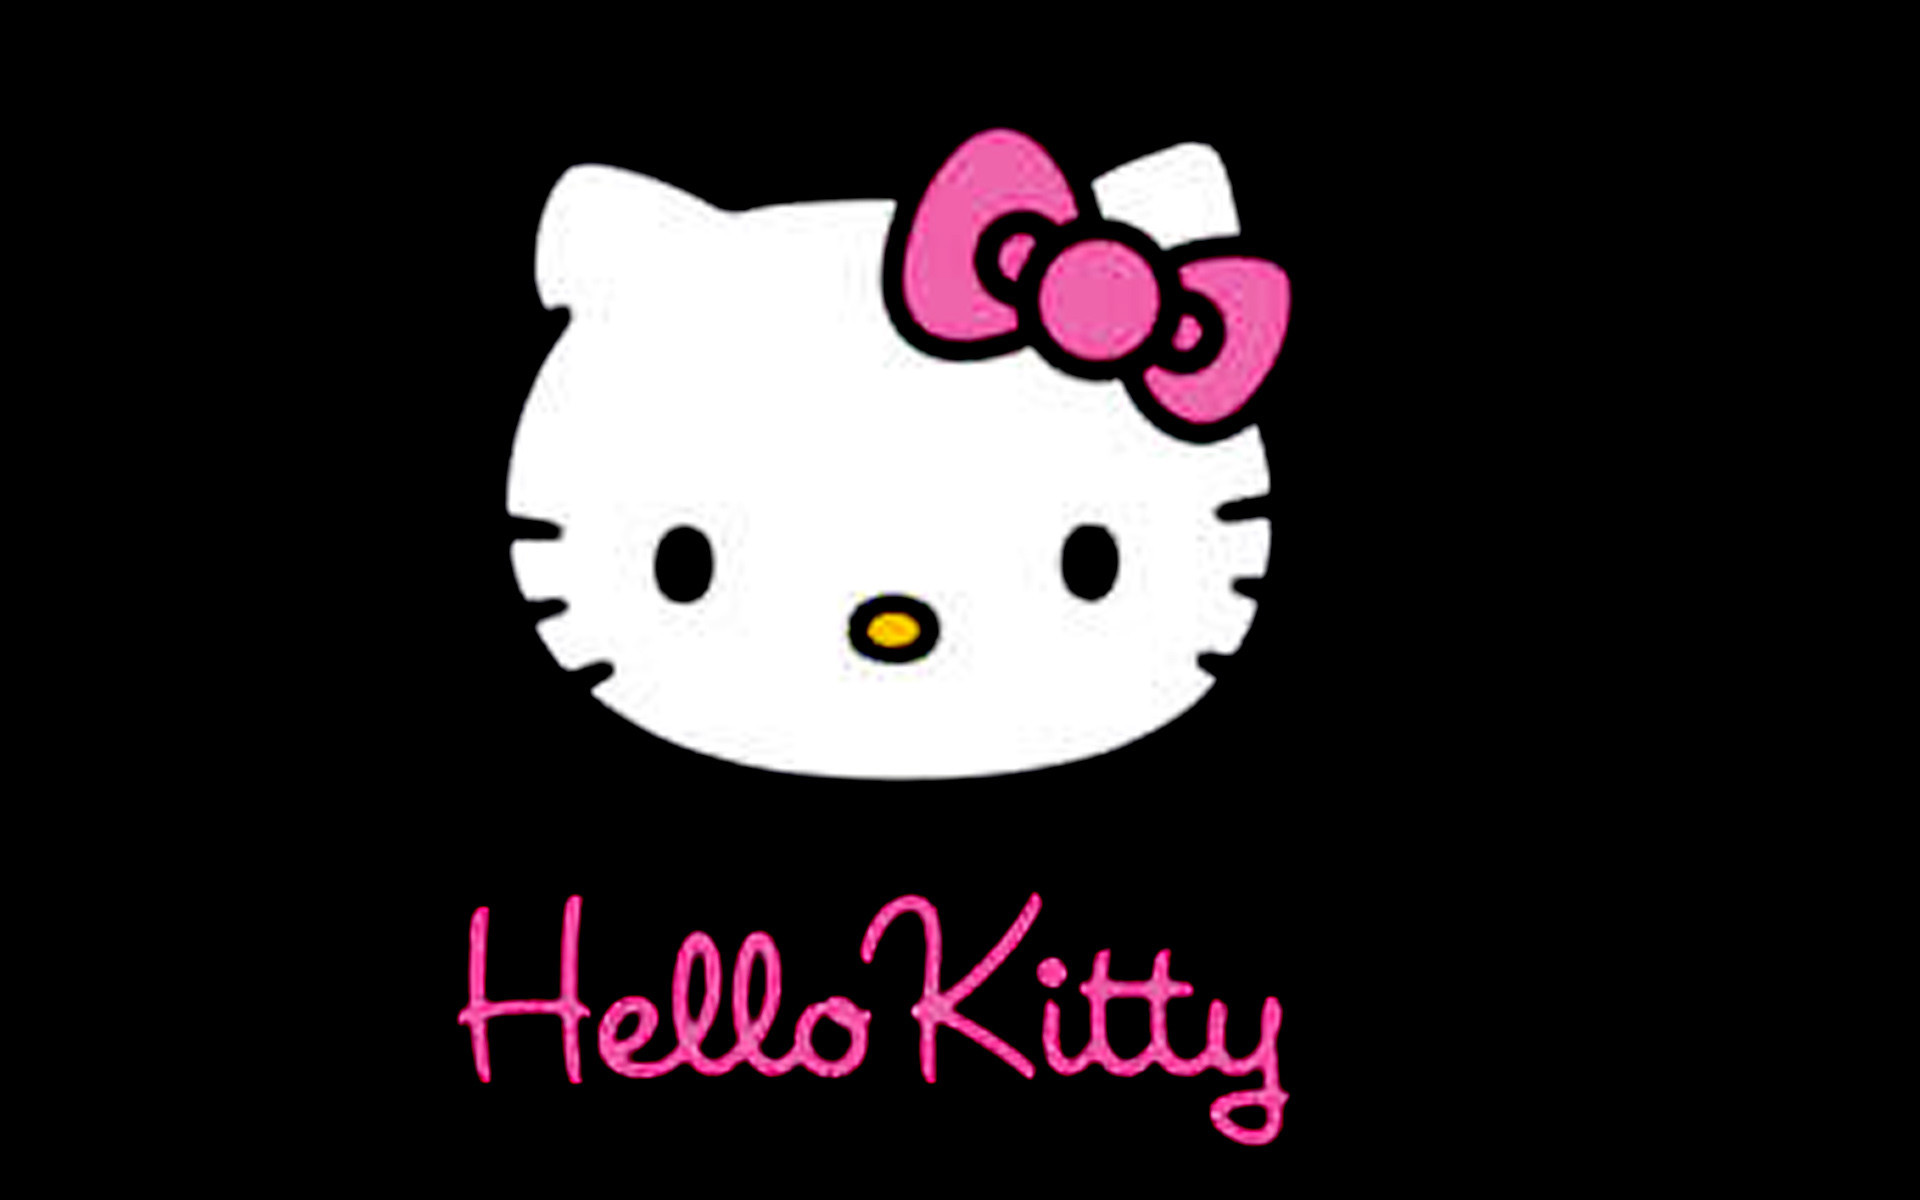 1920x1200  best ideas about Hello kitty wallpaper on Pinterest Kitty | HD  Wallpapers | Pinterest | Hello kitty images and Wallpaper